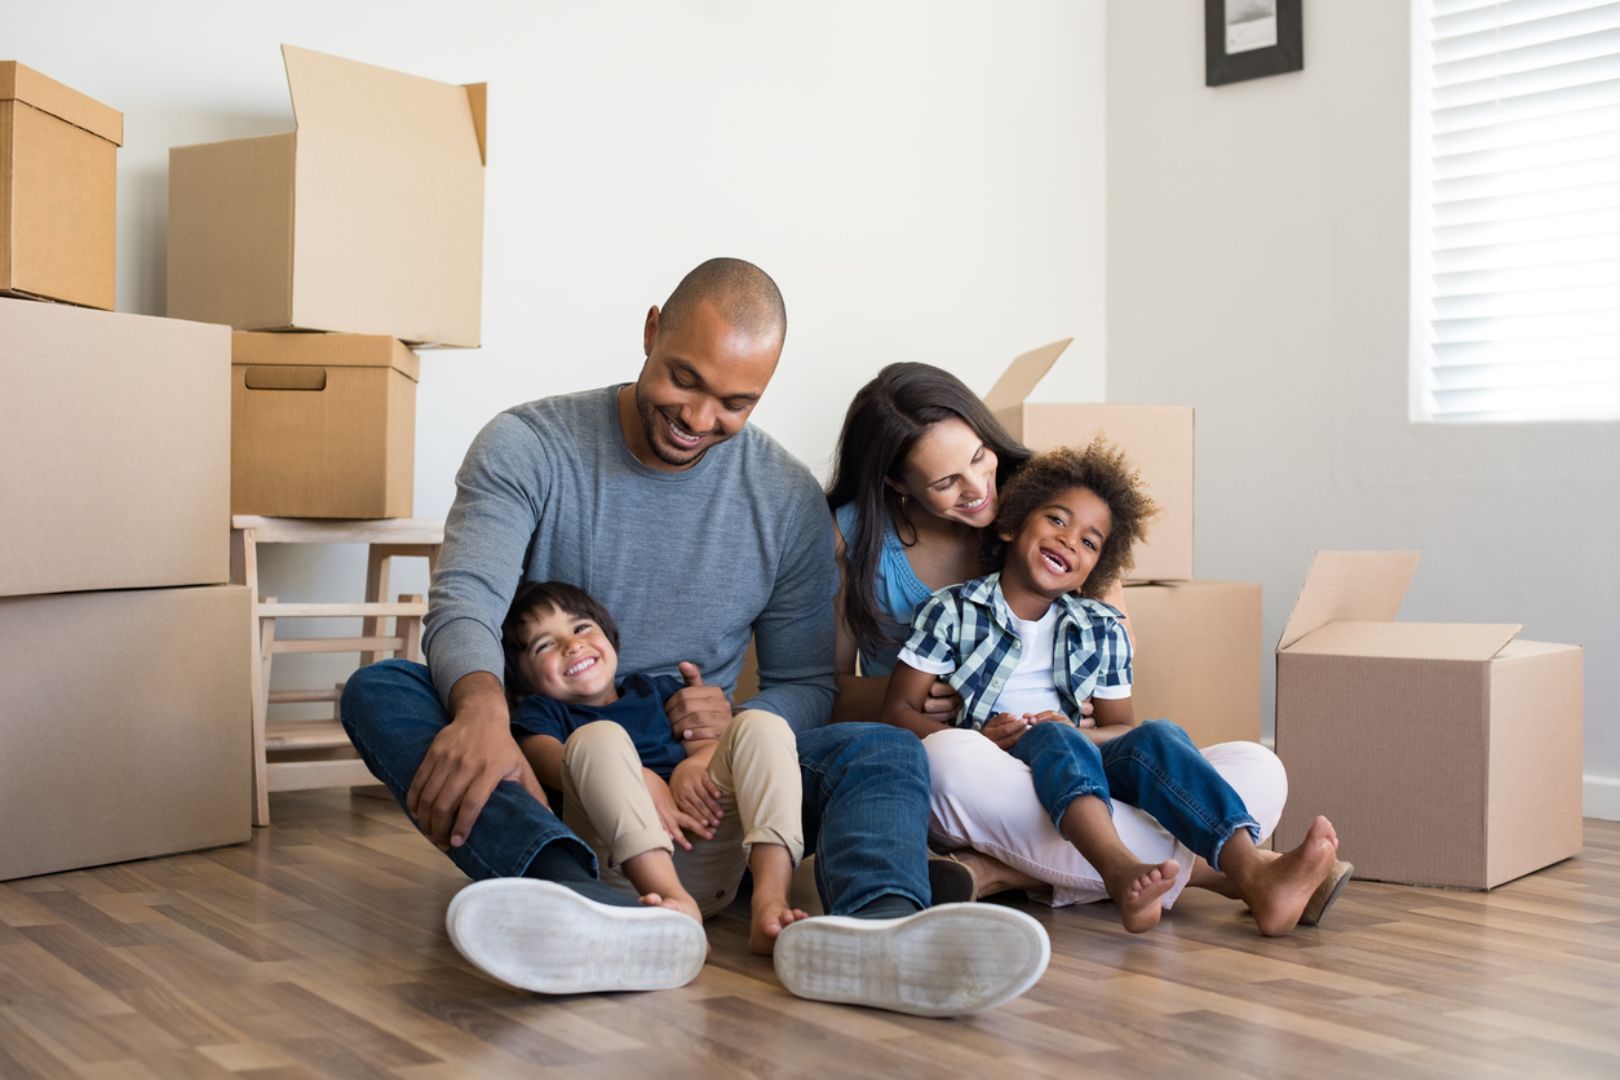 Top Reasons for Moving House